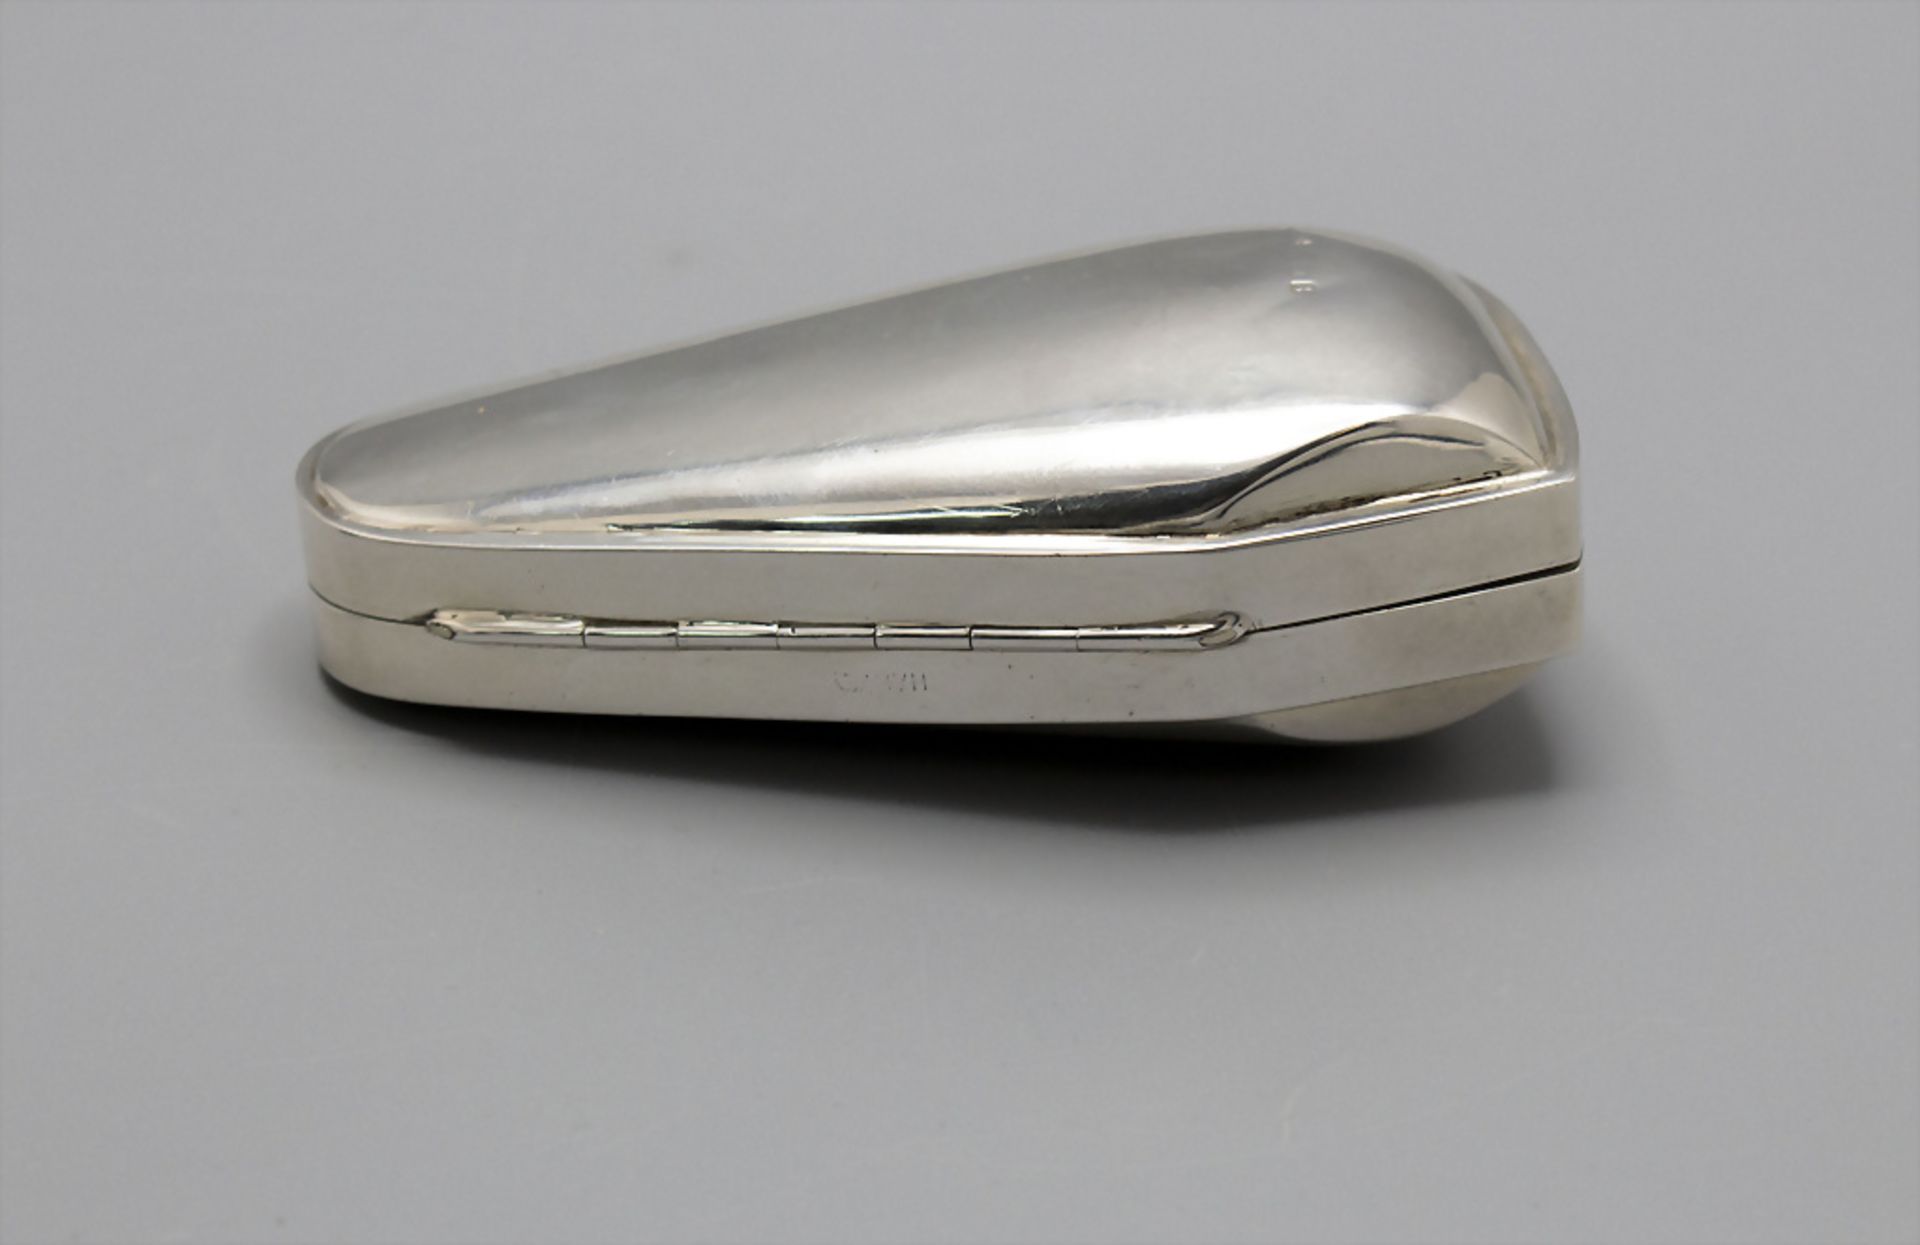 Pfeifenetui in Silber / A Sterling silver pipe box, Birmingham, 1906 - Image 2 of 6